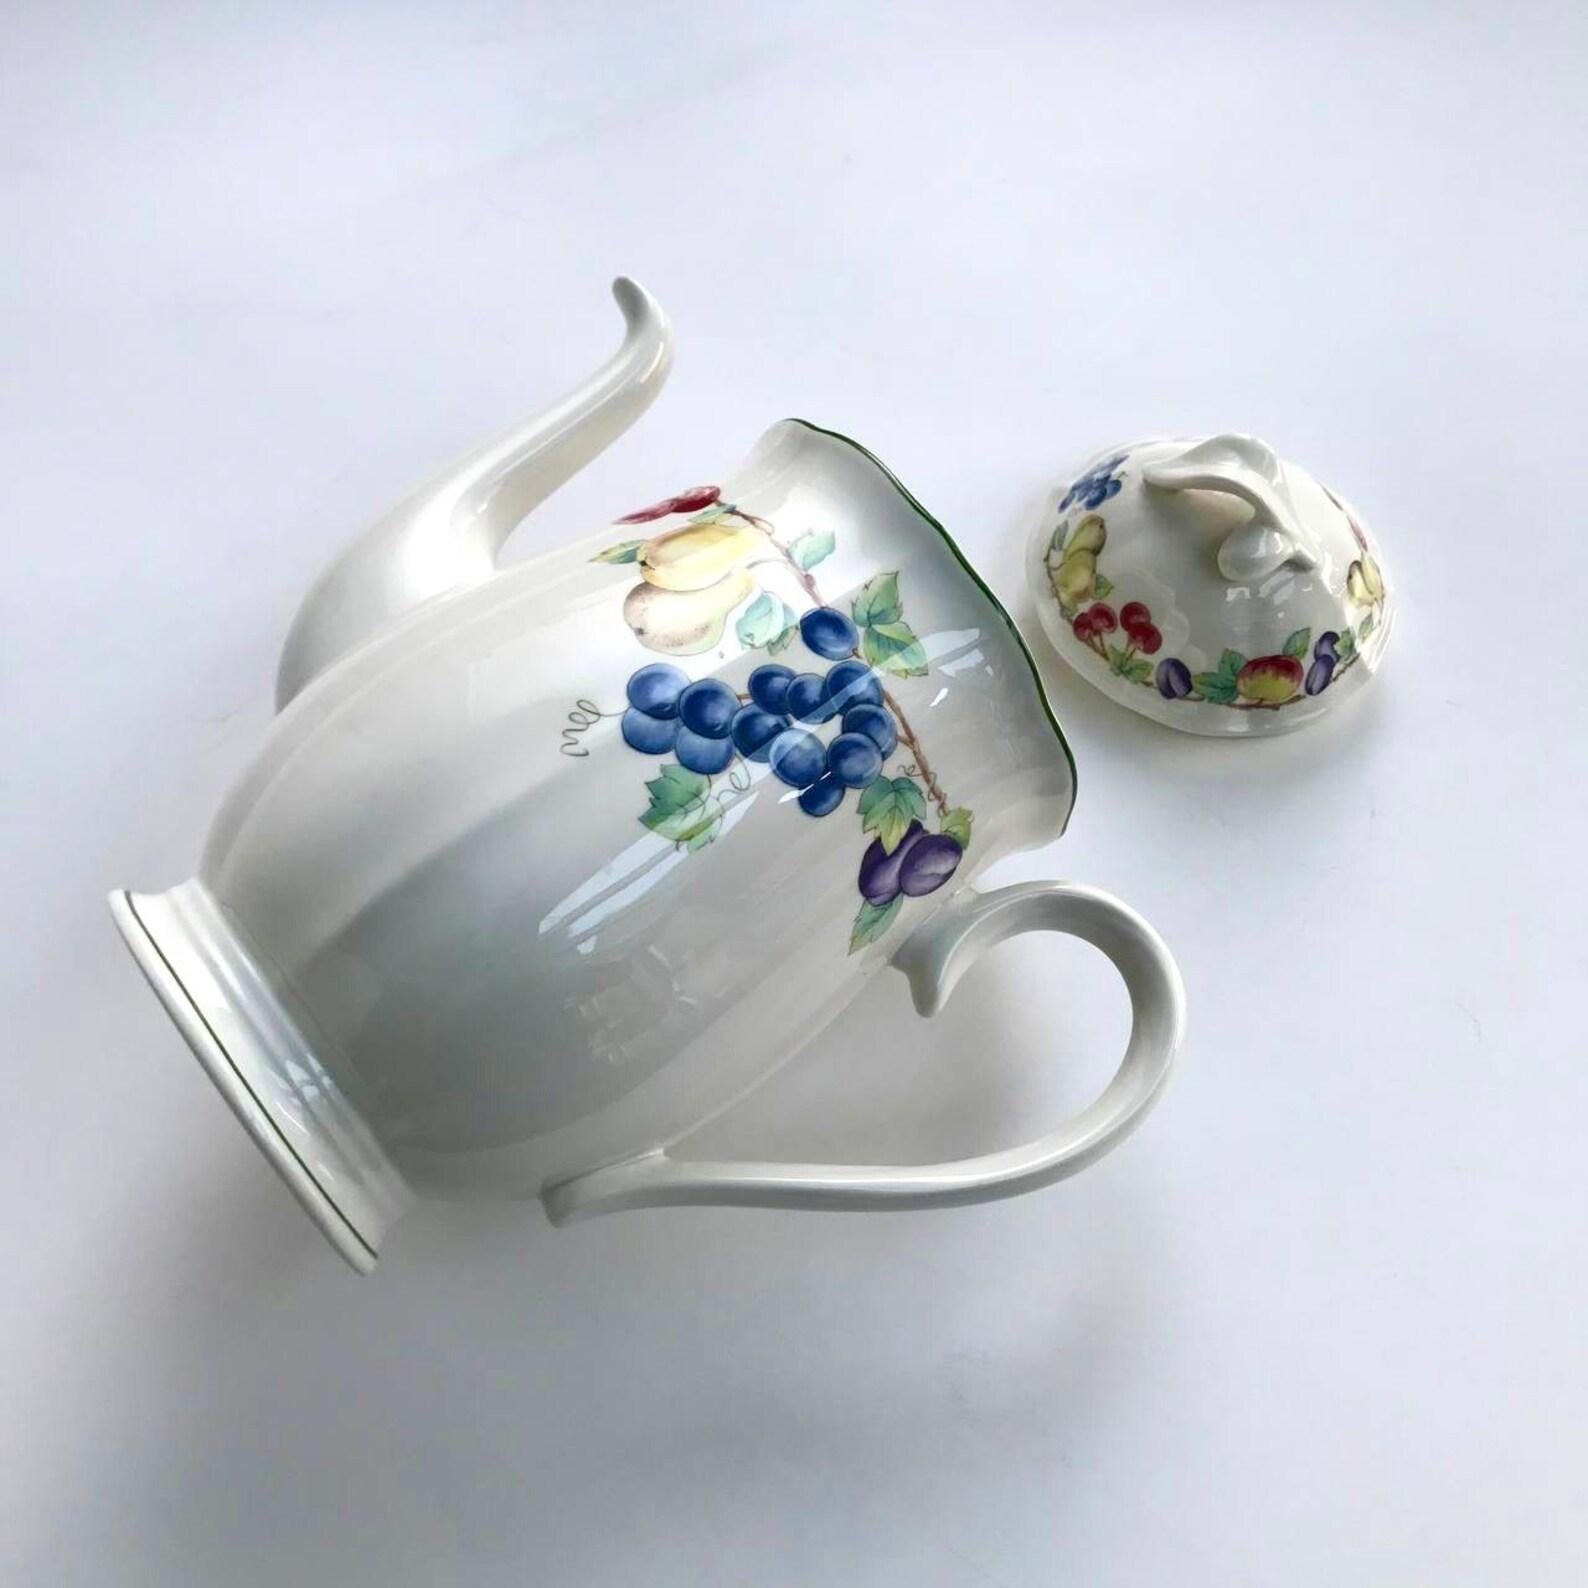 Vintage Villeroy & Boch Teapot from the famous Melina series.

The Melina series is no longer produced by Villeroy & Boch.

Porcelain.

In excellent condition, no chips, cracks or crazing. 

Size:

Height. -  8.8    Inc    22.5 cm.

Volume - 40.5 fl